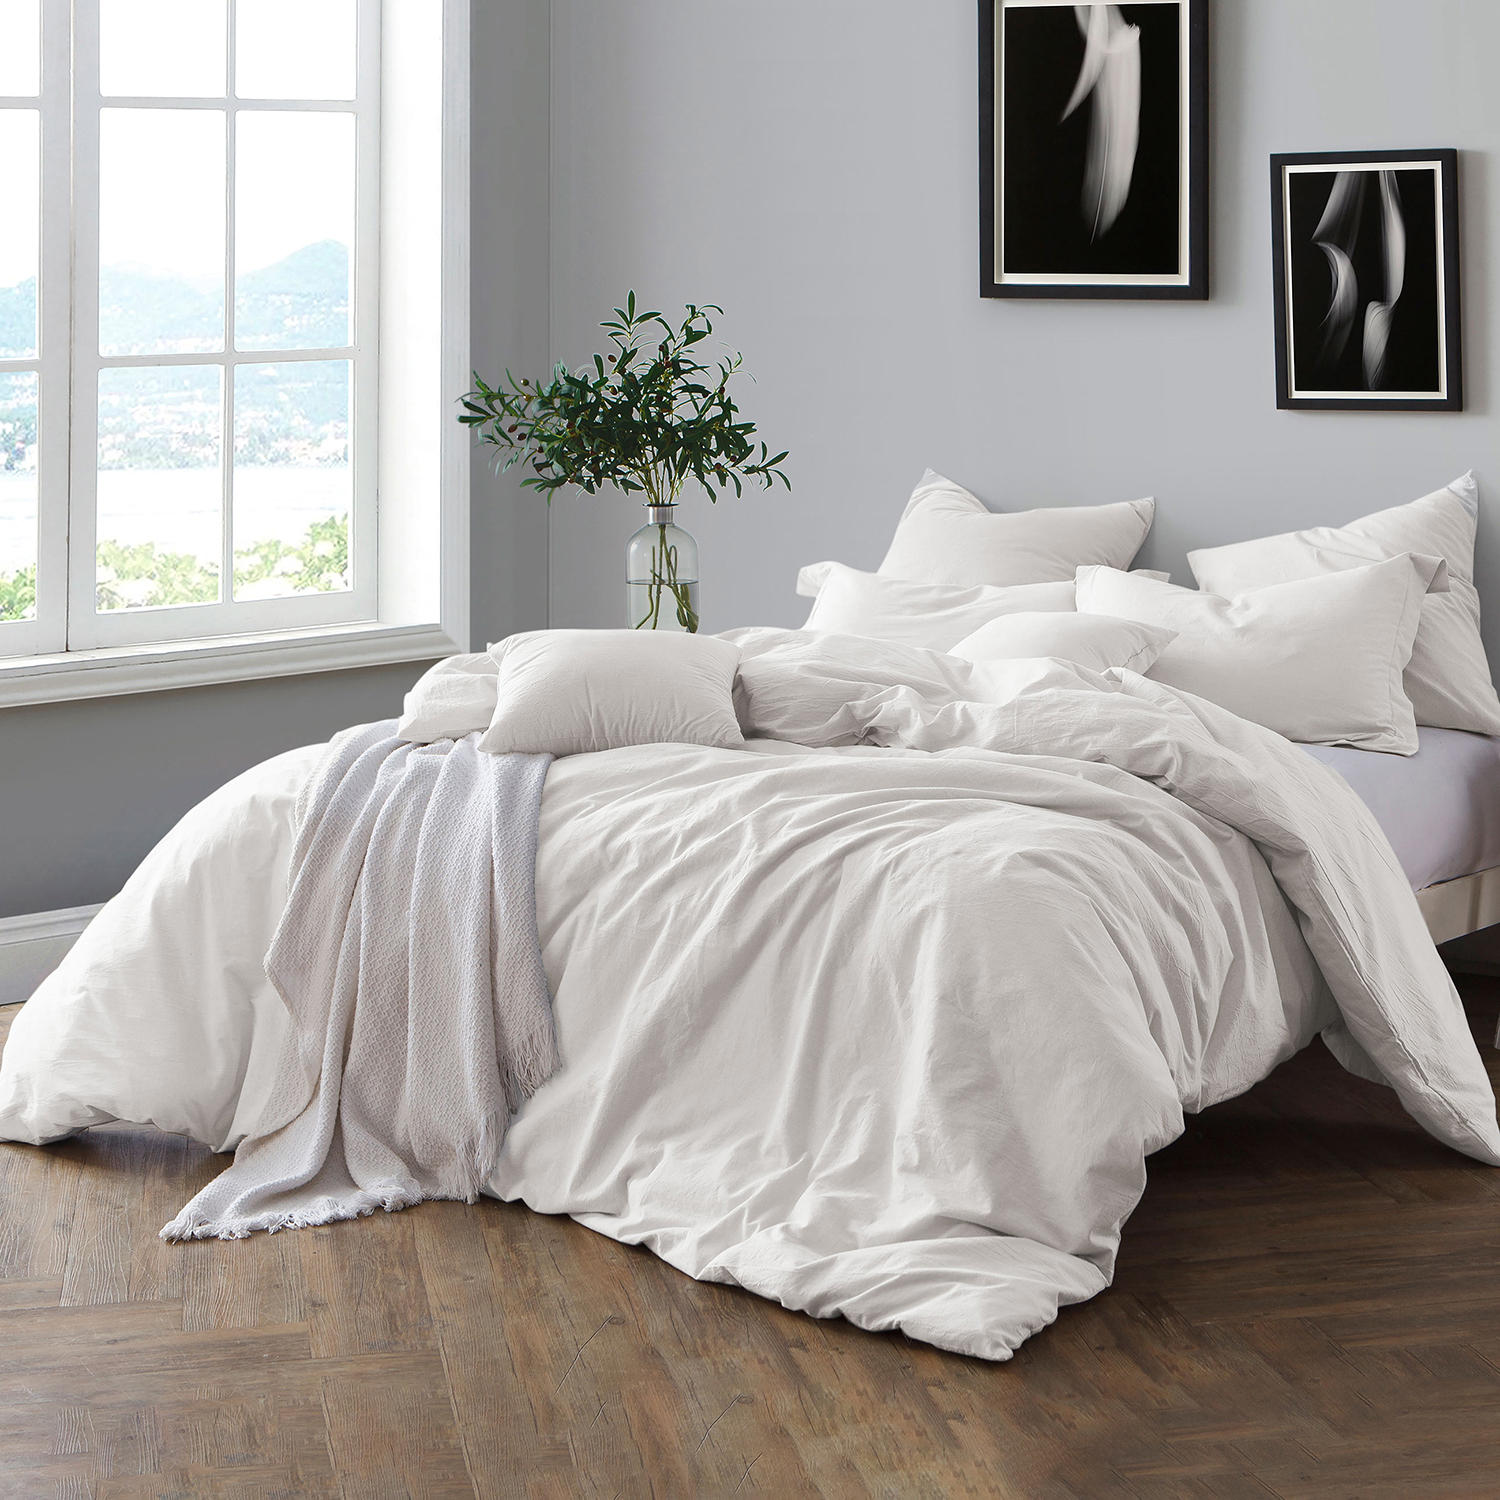 Swift Home Pre-Washed Cotton Chambray Duvet Cover and Sham Bedding Set